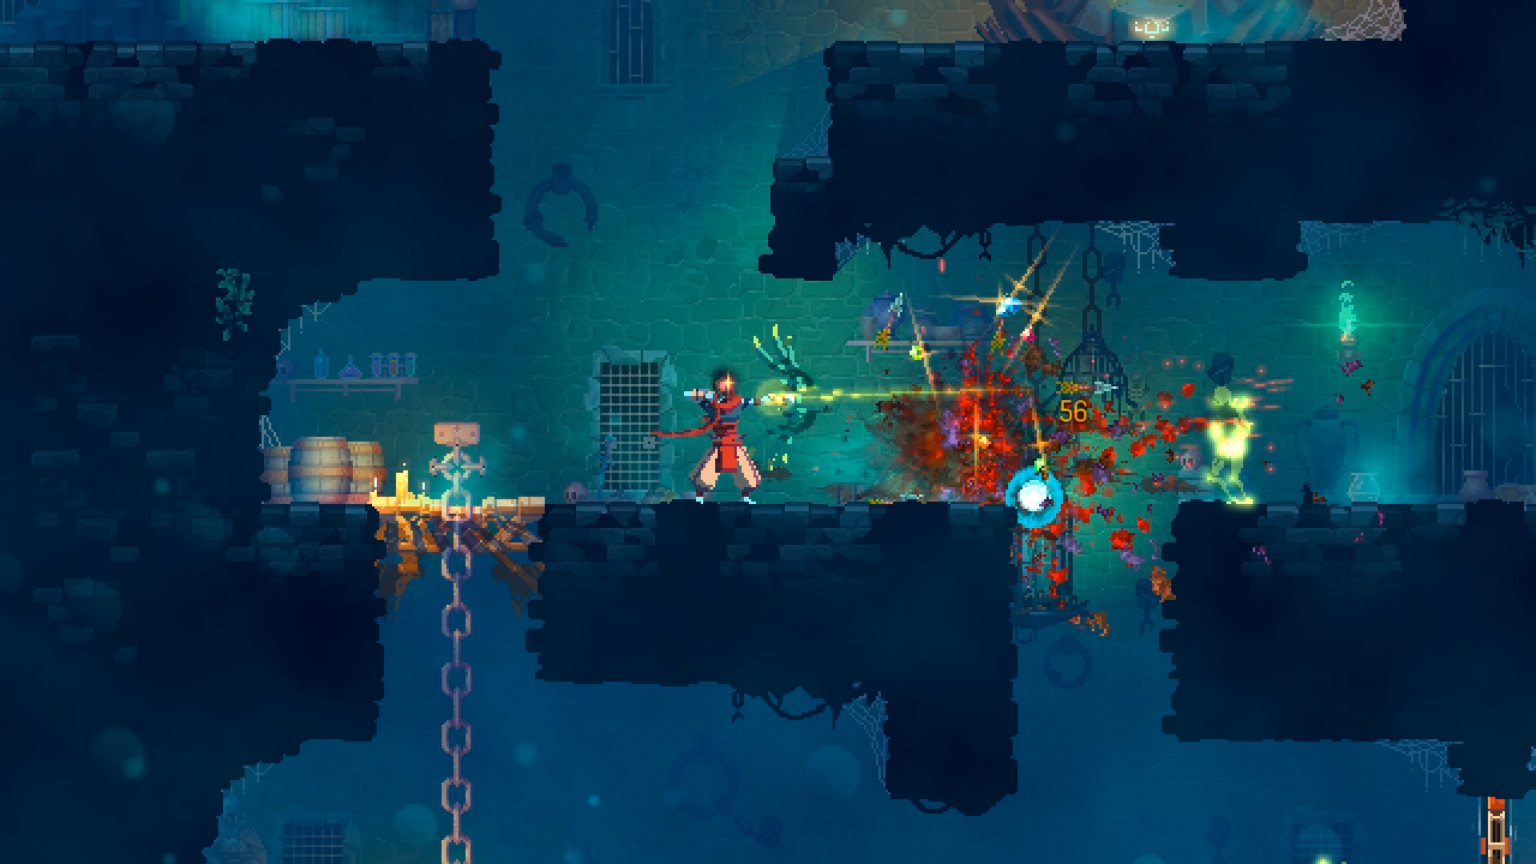 Dead Cells download the new for windows